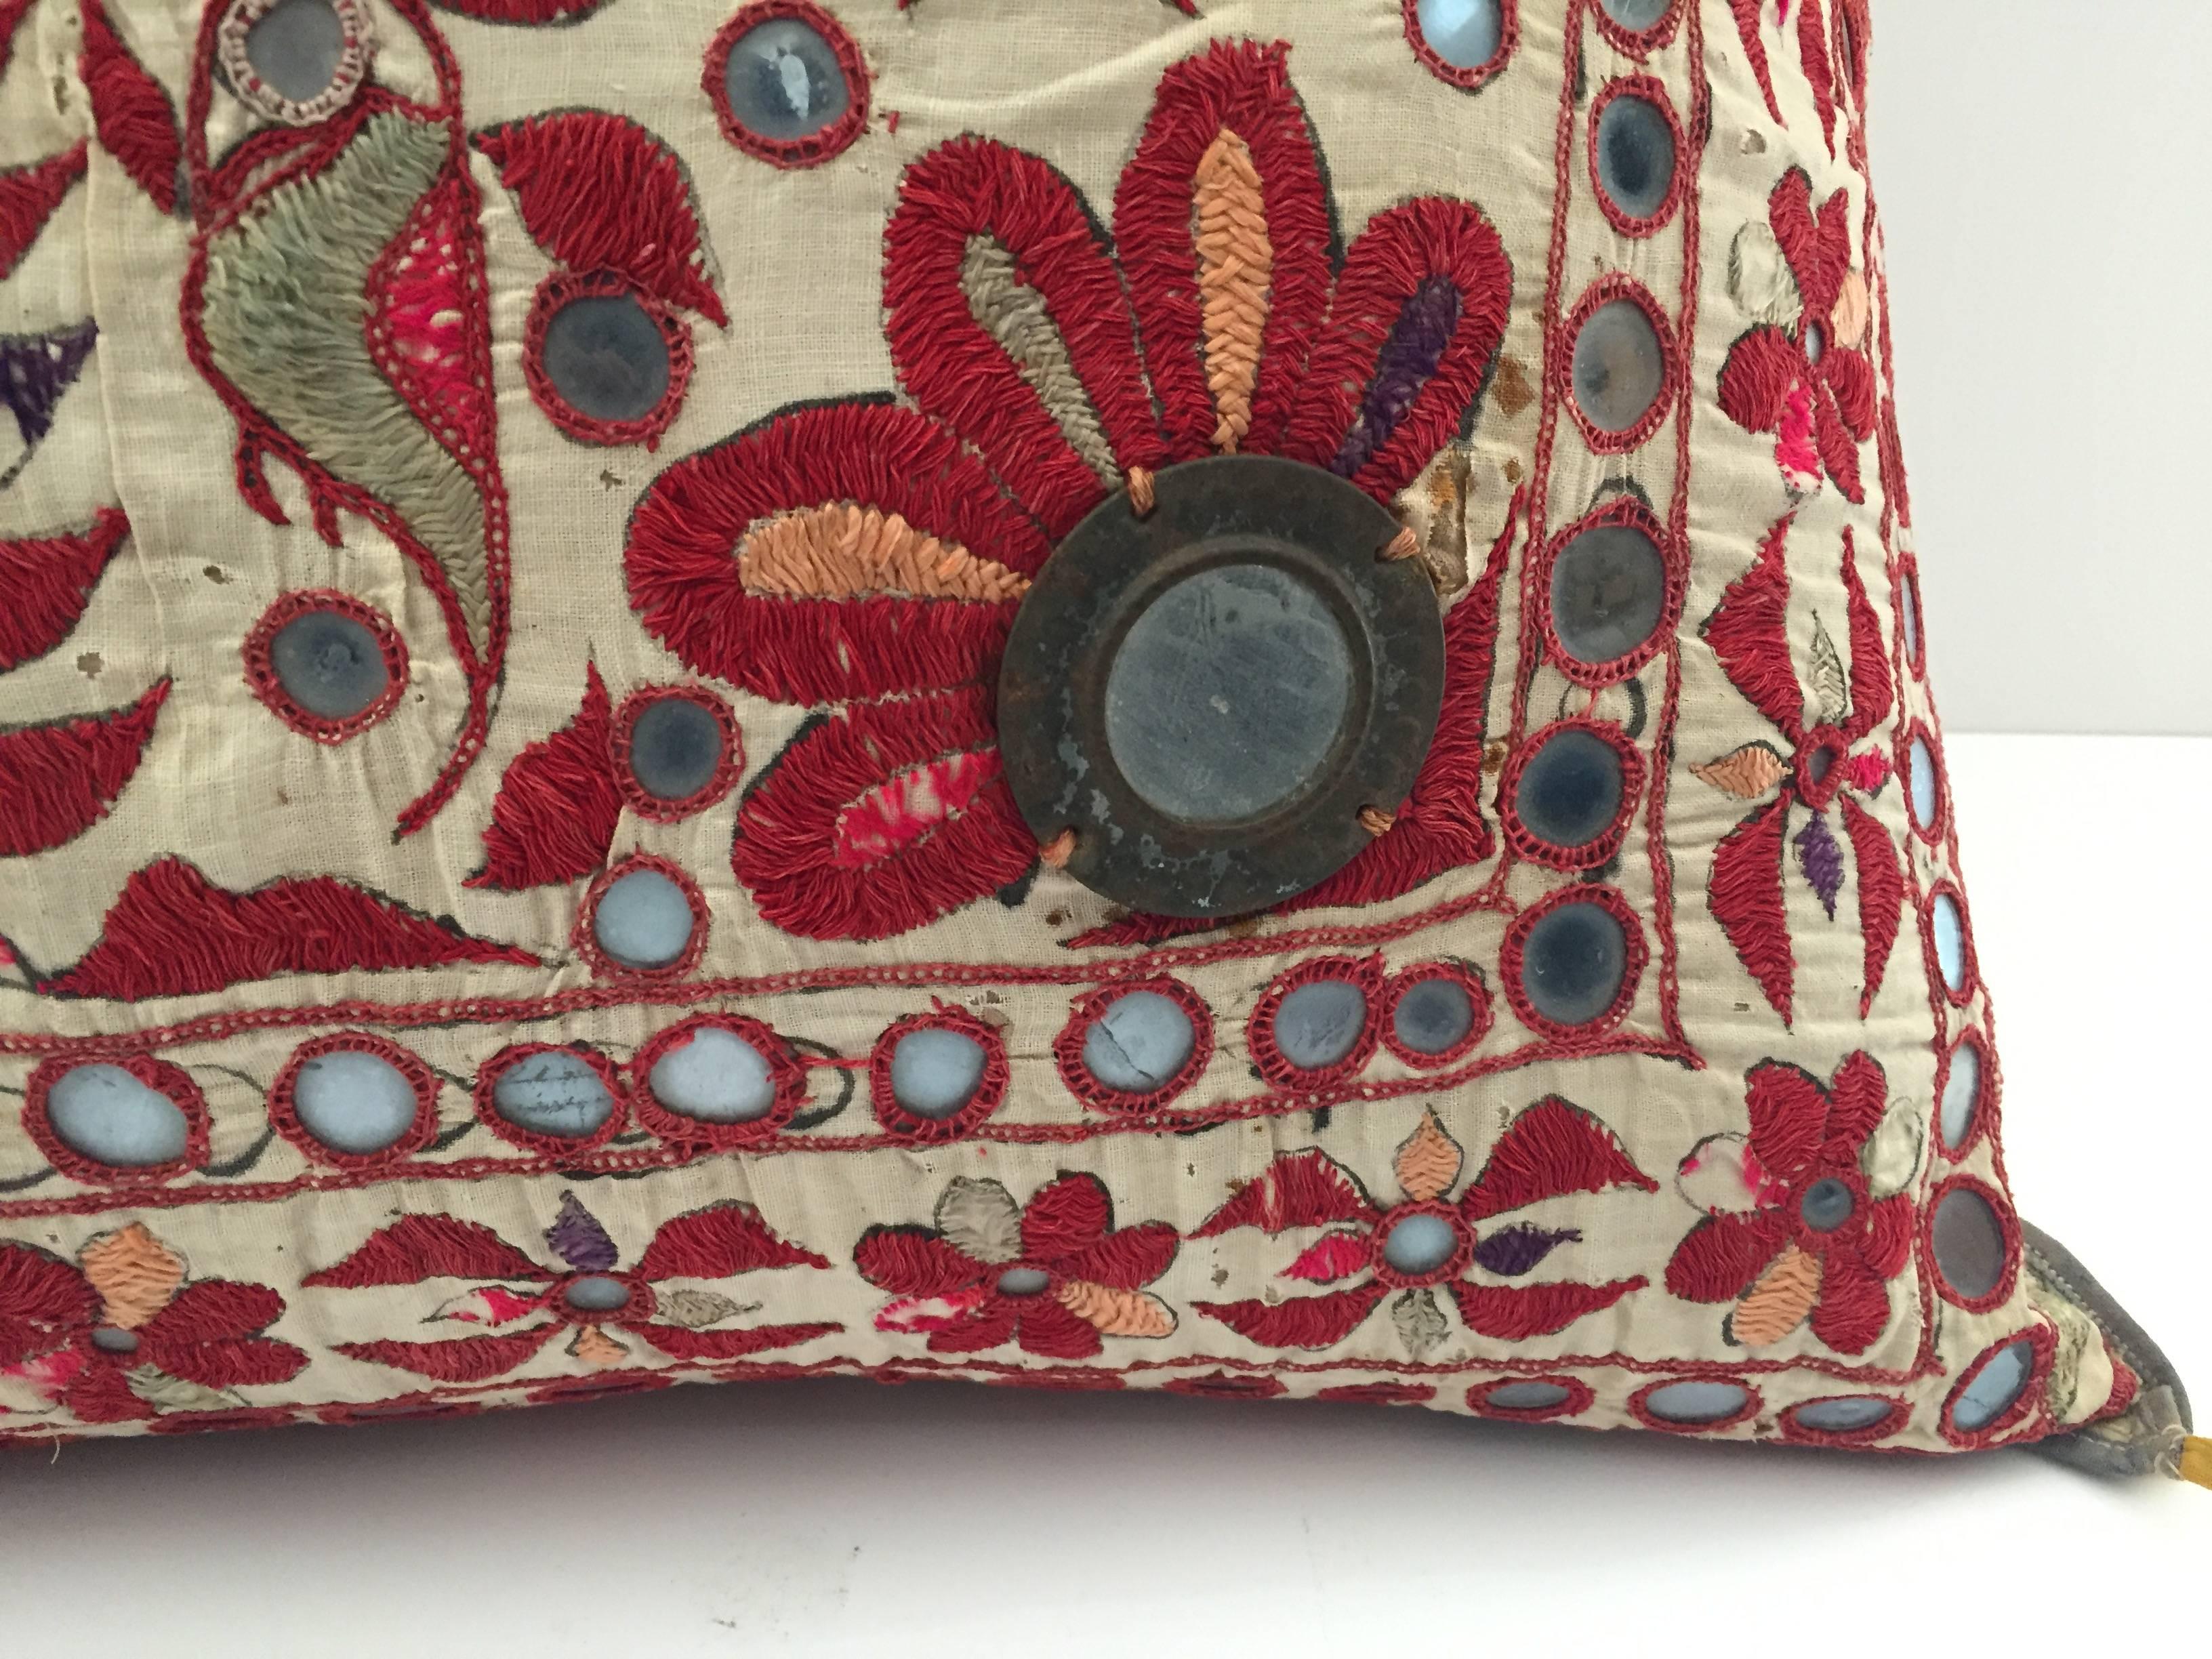 19th Century, Rajasthani Colorful Embroidery and Mirrored Decorative Pillow In Good Condition For Sale In North Hollywood, CA